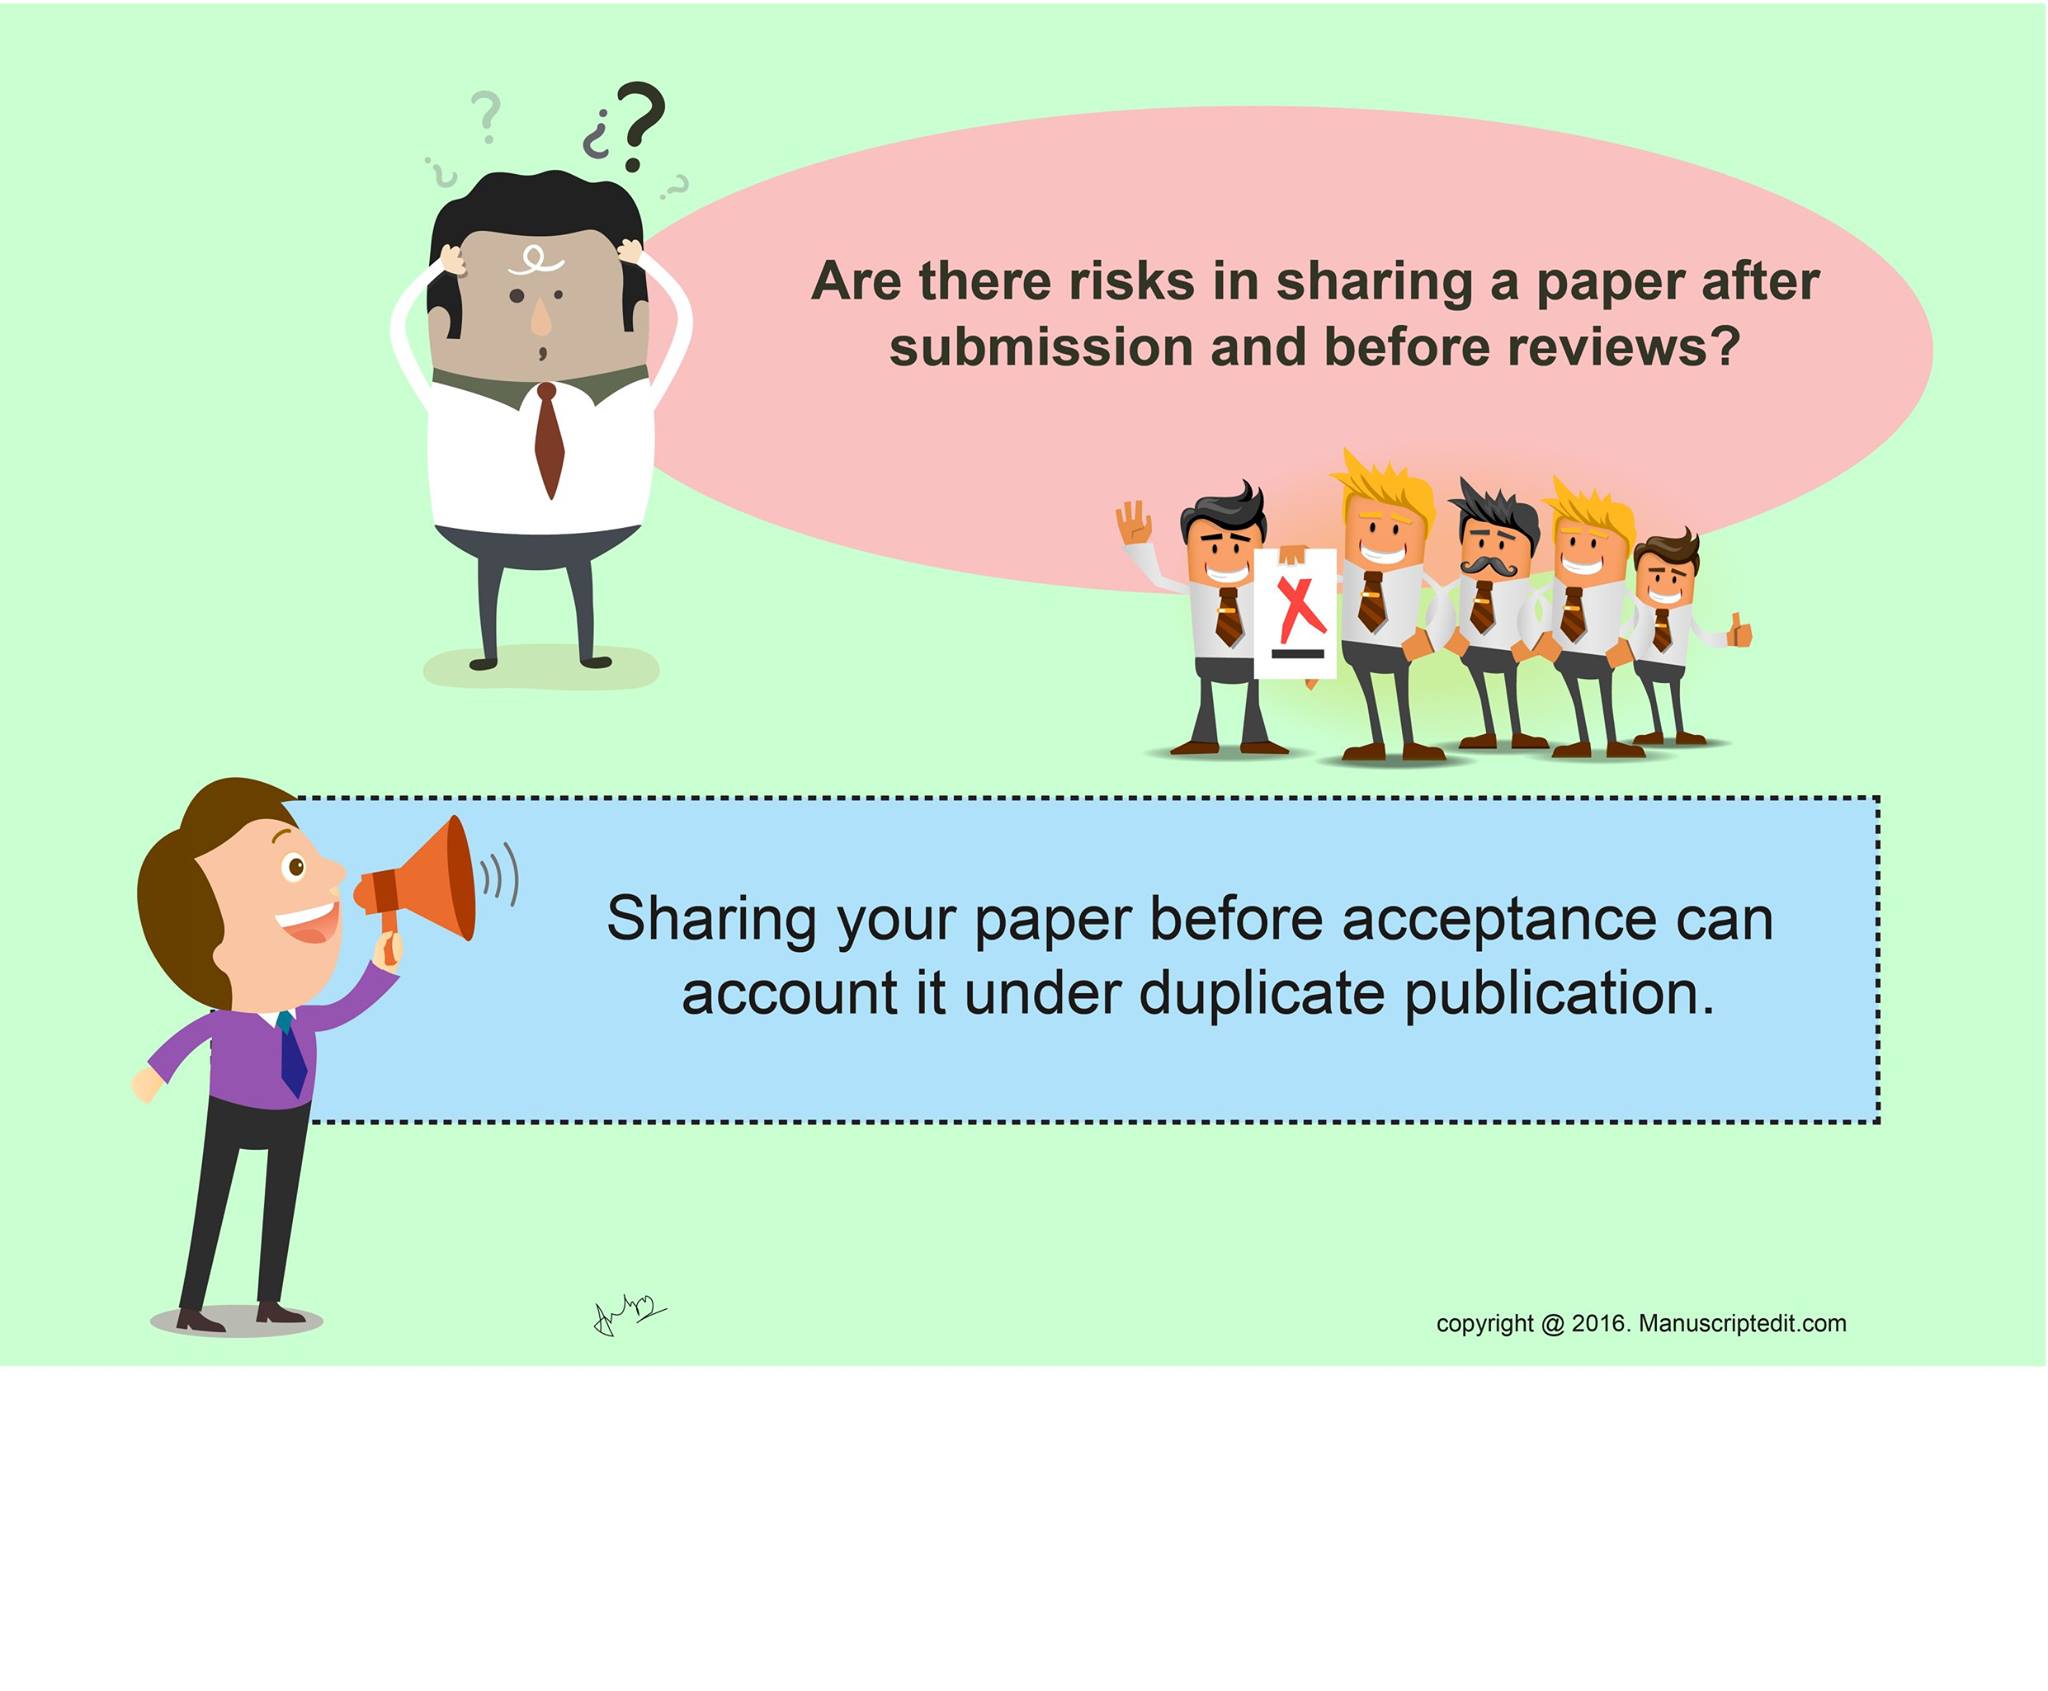 Are there risks in sharing a paper after submission and before reviews?